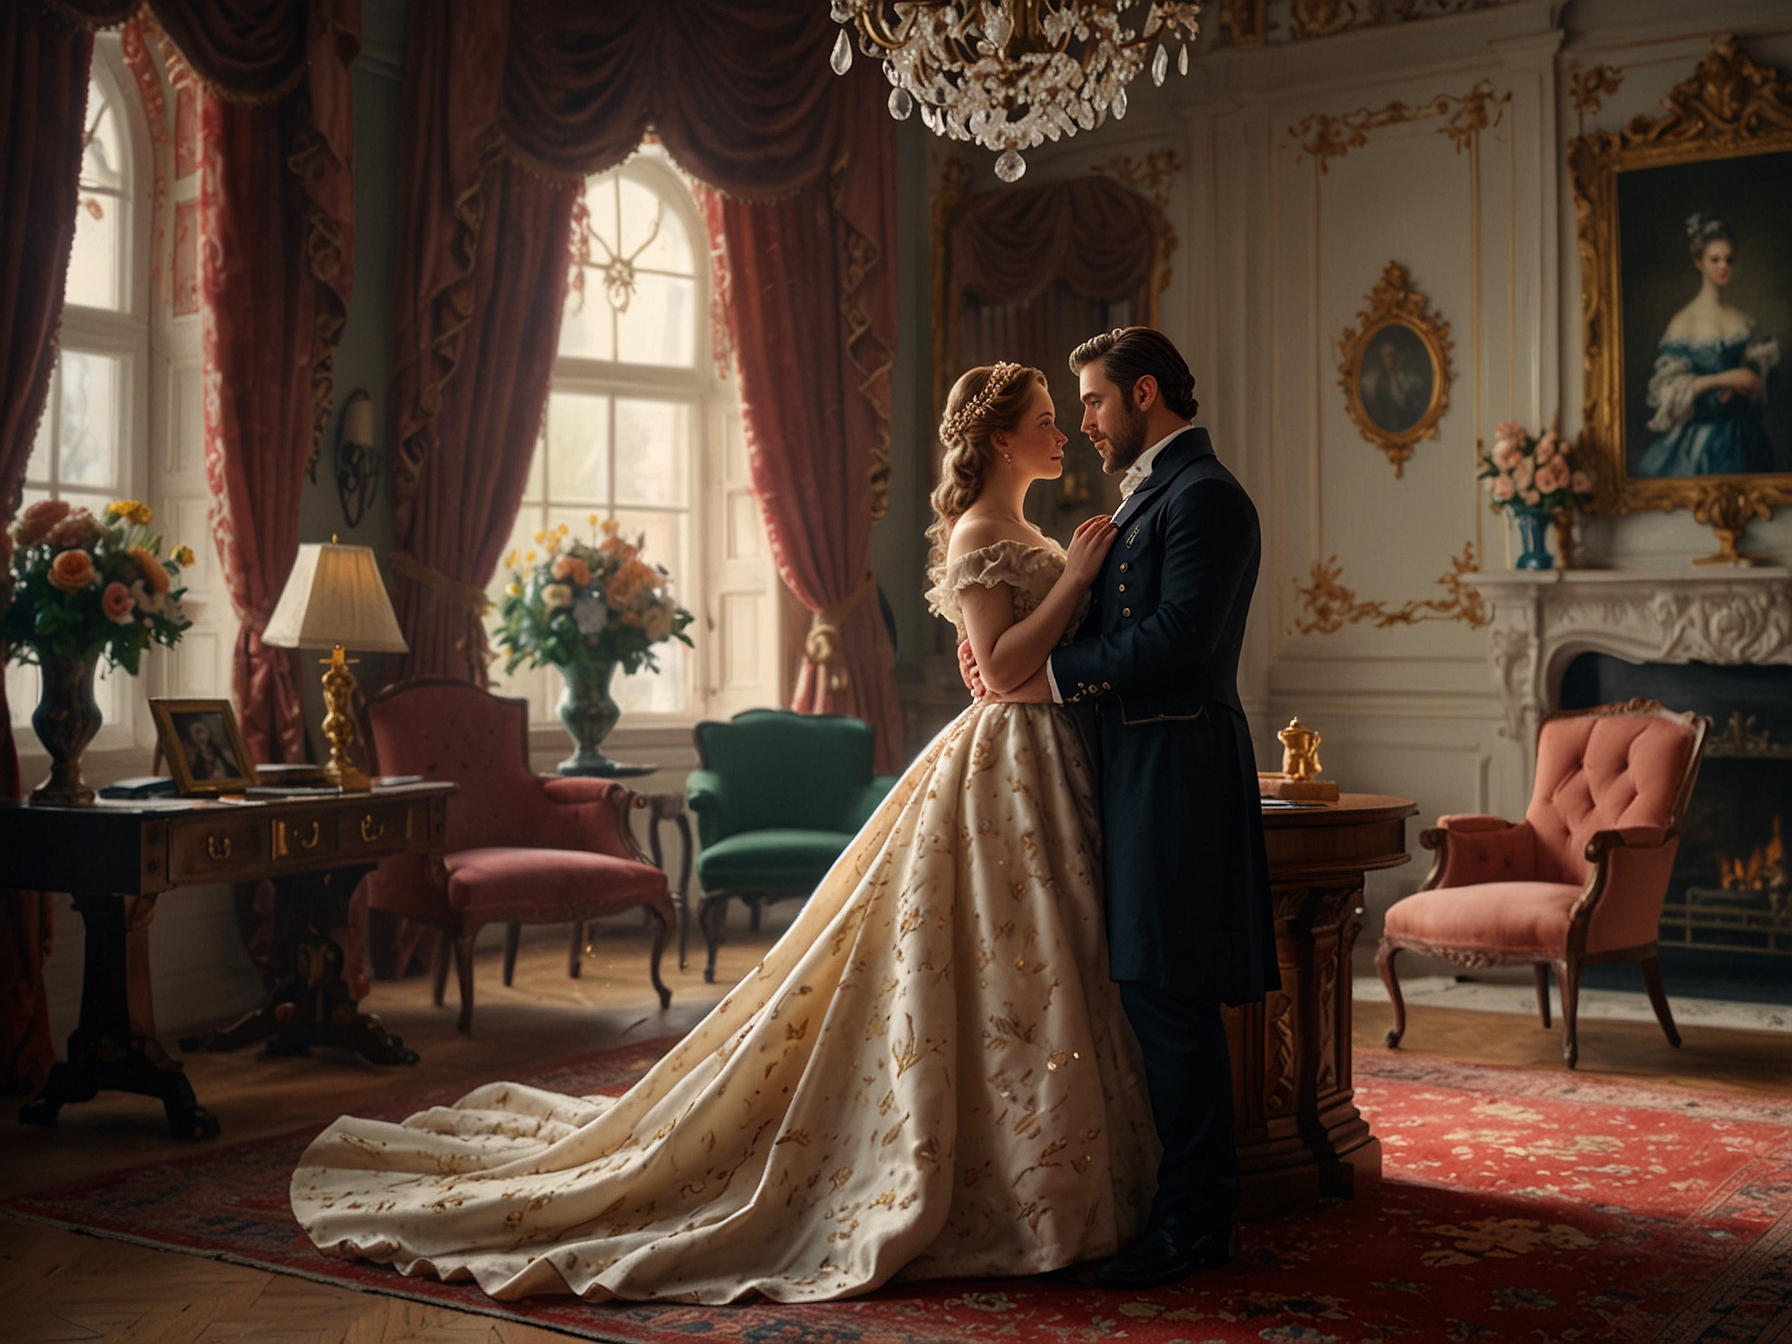 A glamorous scene from 'Bridgerton' Season 3, showcasing the show's stunning production design and costumes. The image captures the essence of the historical romance series that keeps viewers engaged.